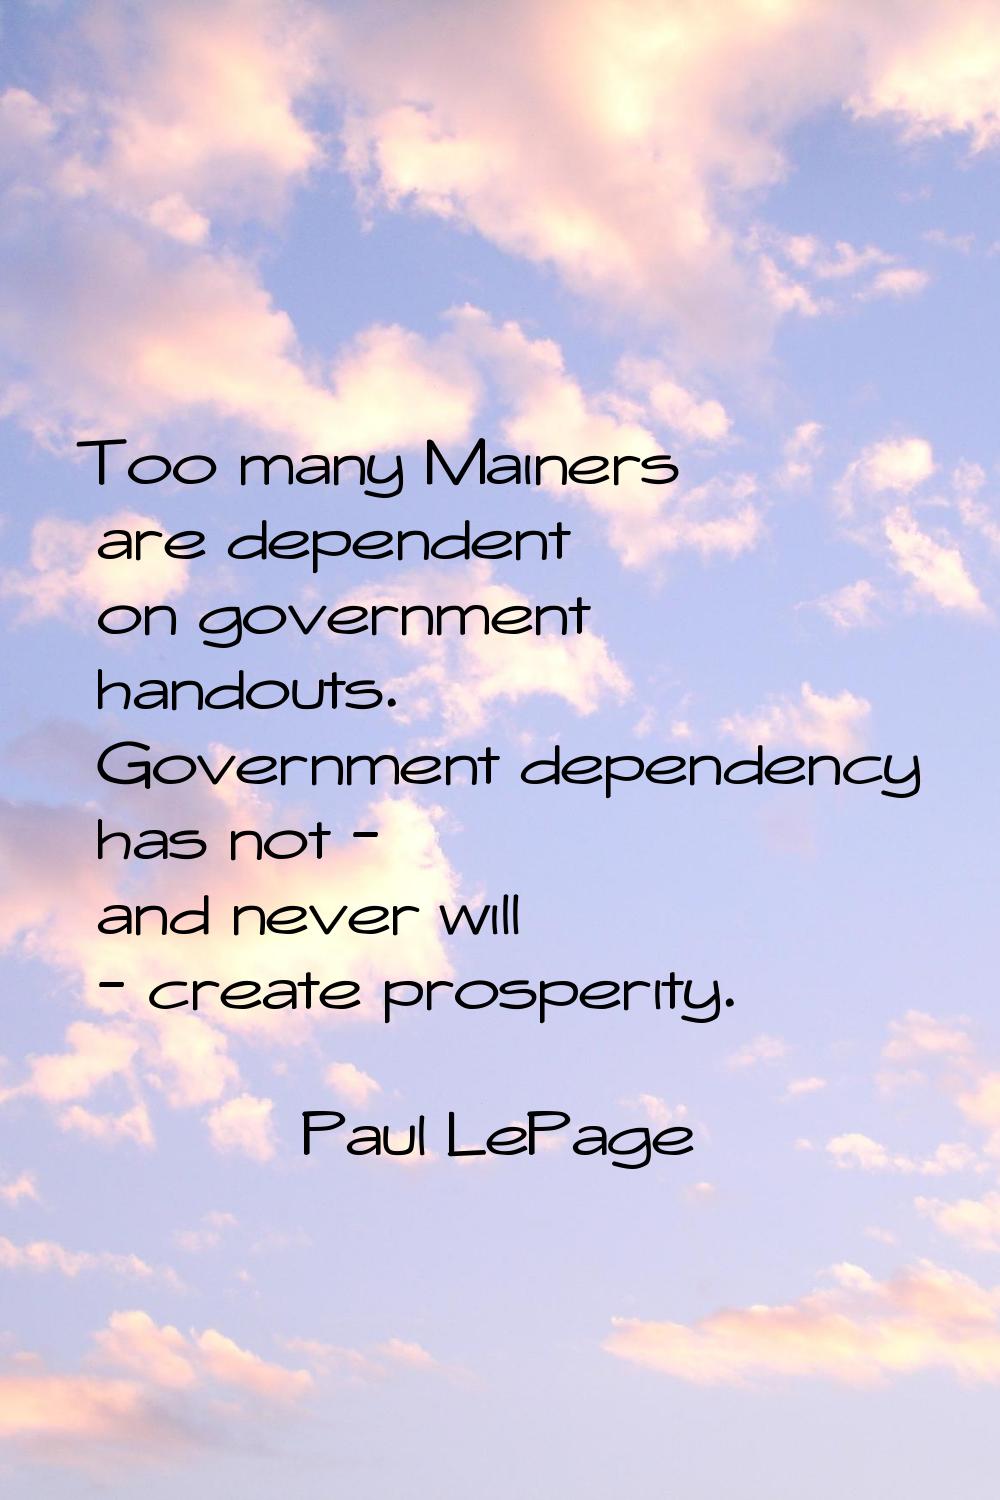 Too many Mainers are dependent on government handouts. Government dependency has not - and never wi